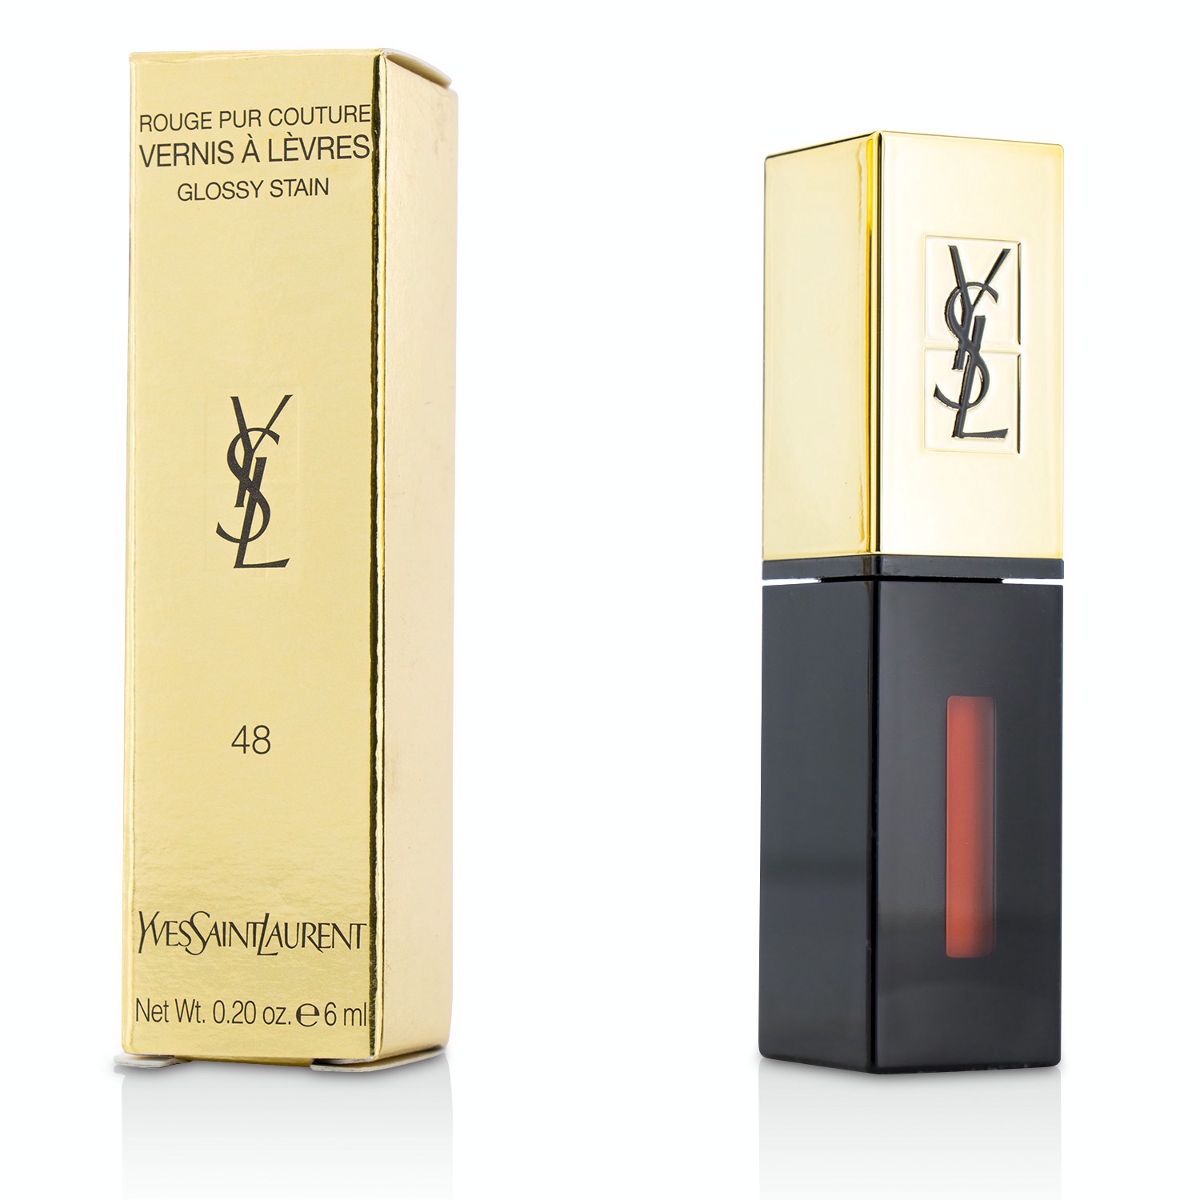 Rouge Pur Couture Vernis a Levres Glossy Stain - # 48 Orange Graffiti Yves Saint Laurent Image